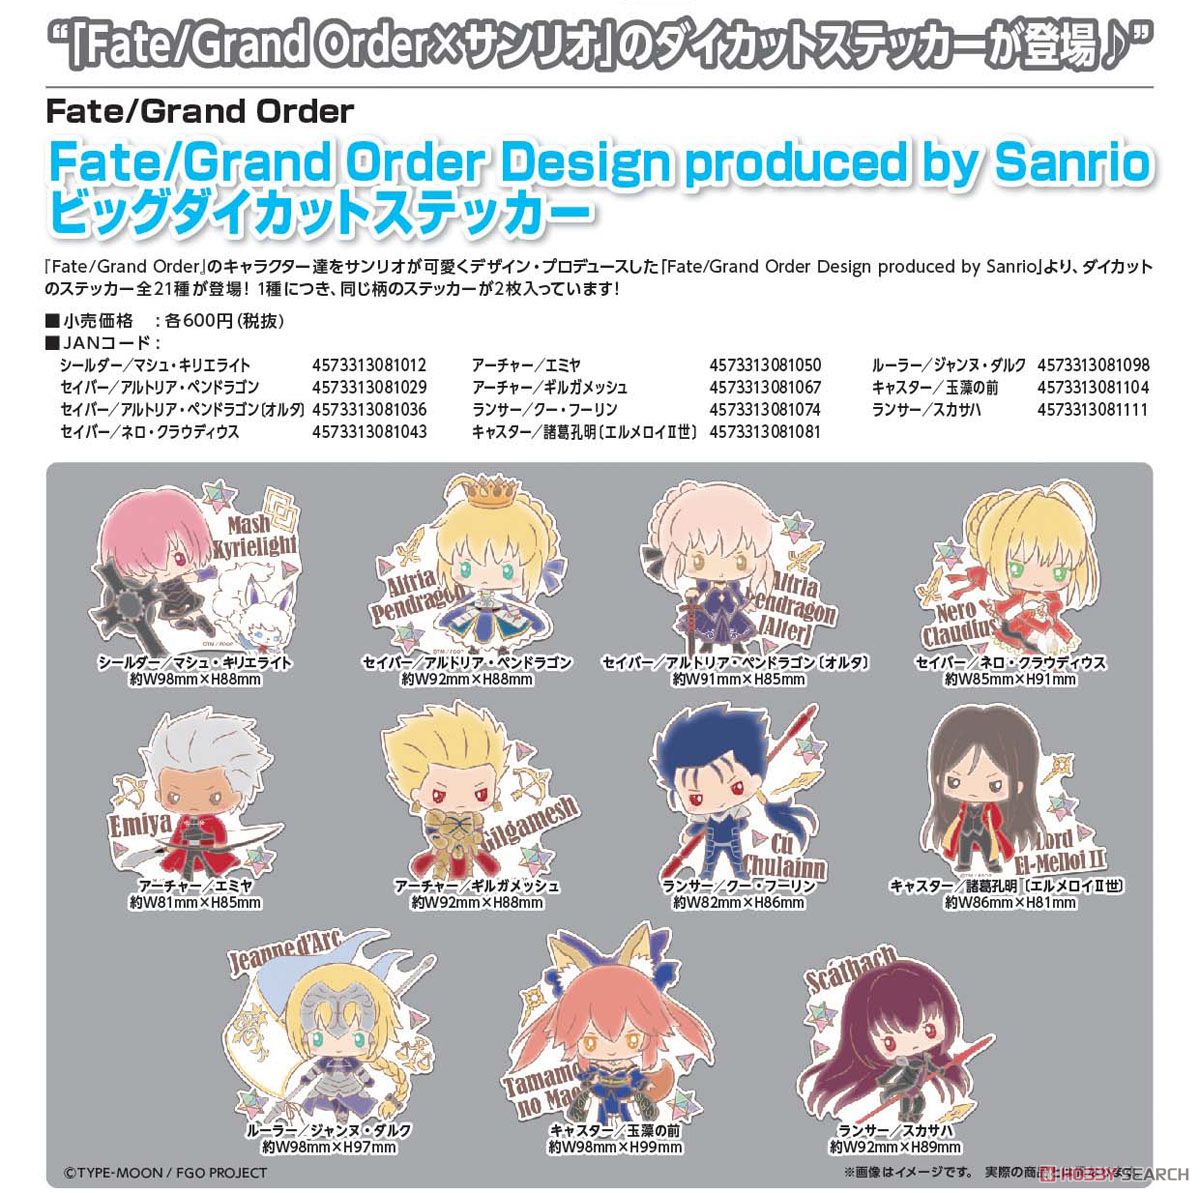 Fate/Grand Order Design produced by Sanrio ビッグダイカットステッカー ライダー/オジマンディアス (キャラクターグッズ) その他の画像1